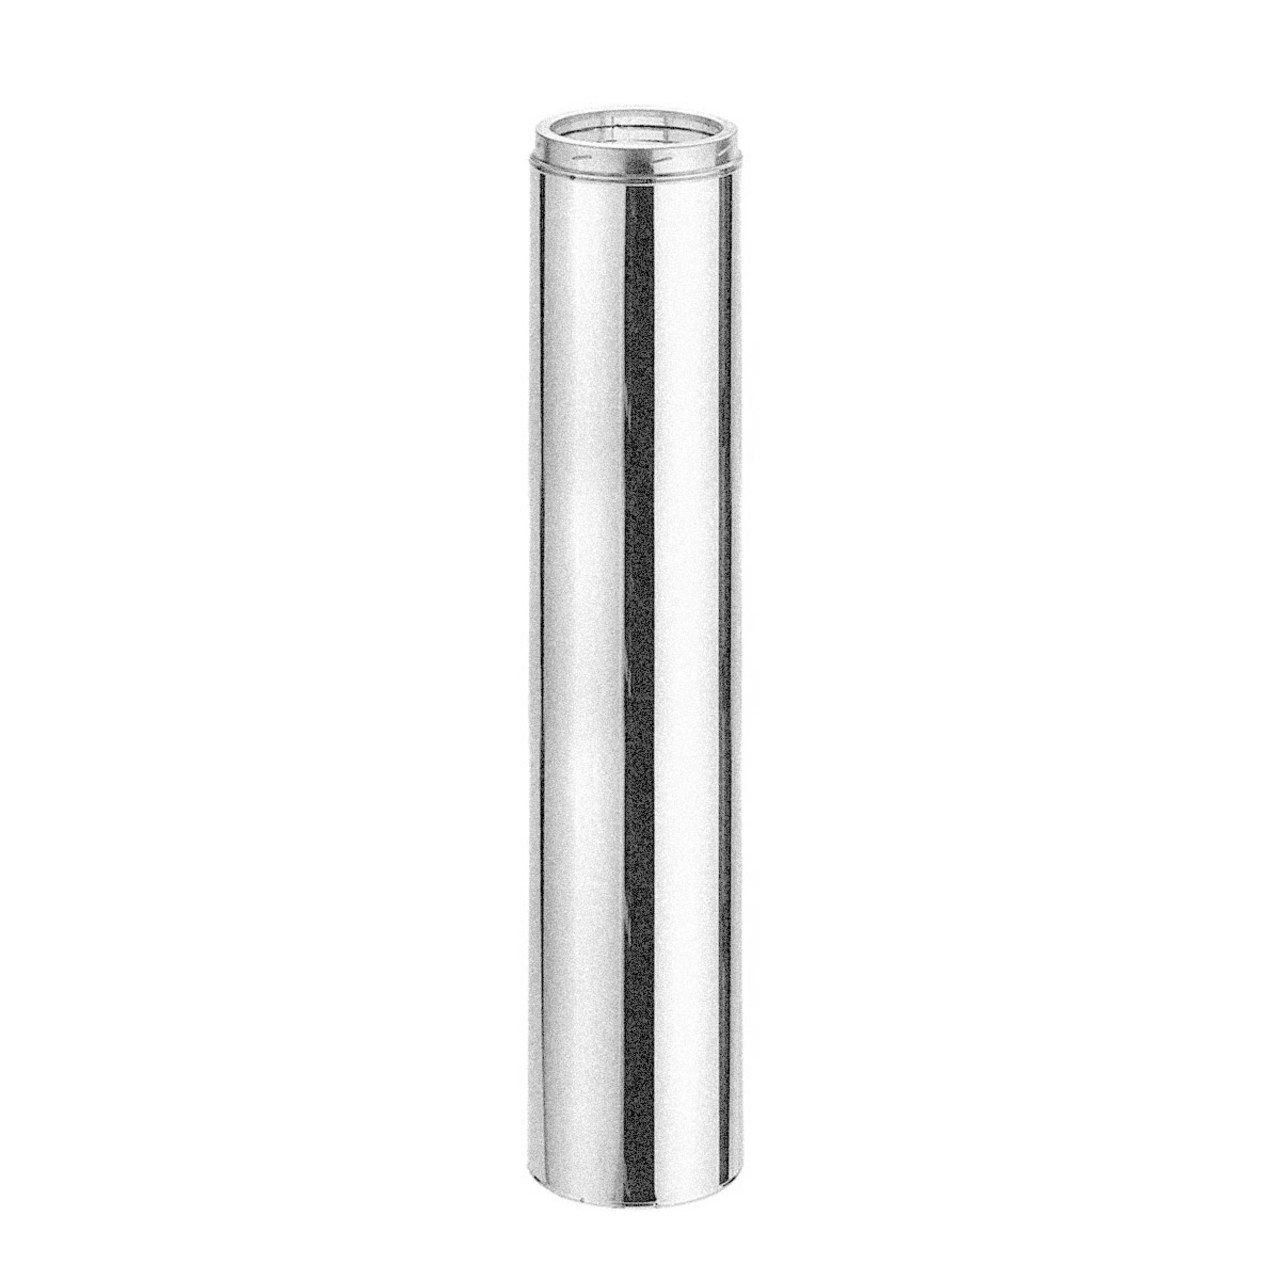 6 x 48 DuraTech Galvanized Chimney Pipe - 6DT-48